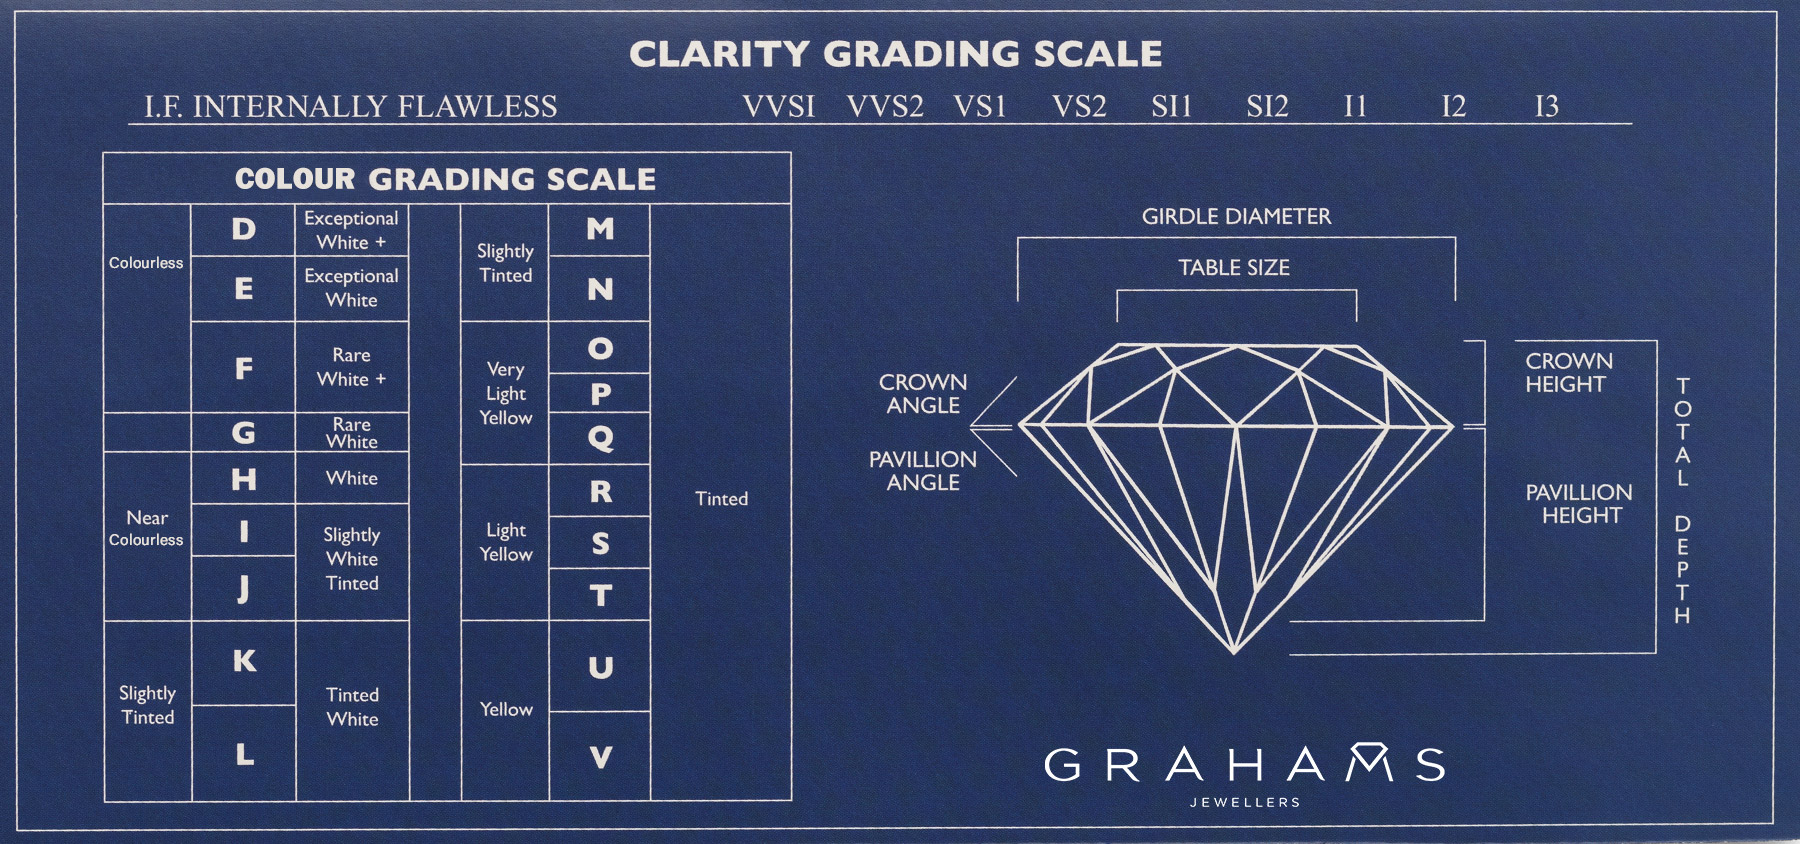 how to buy a diamond without getting duped: choose the right clarity